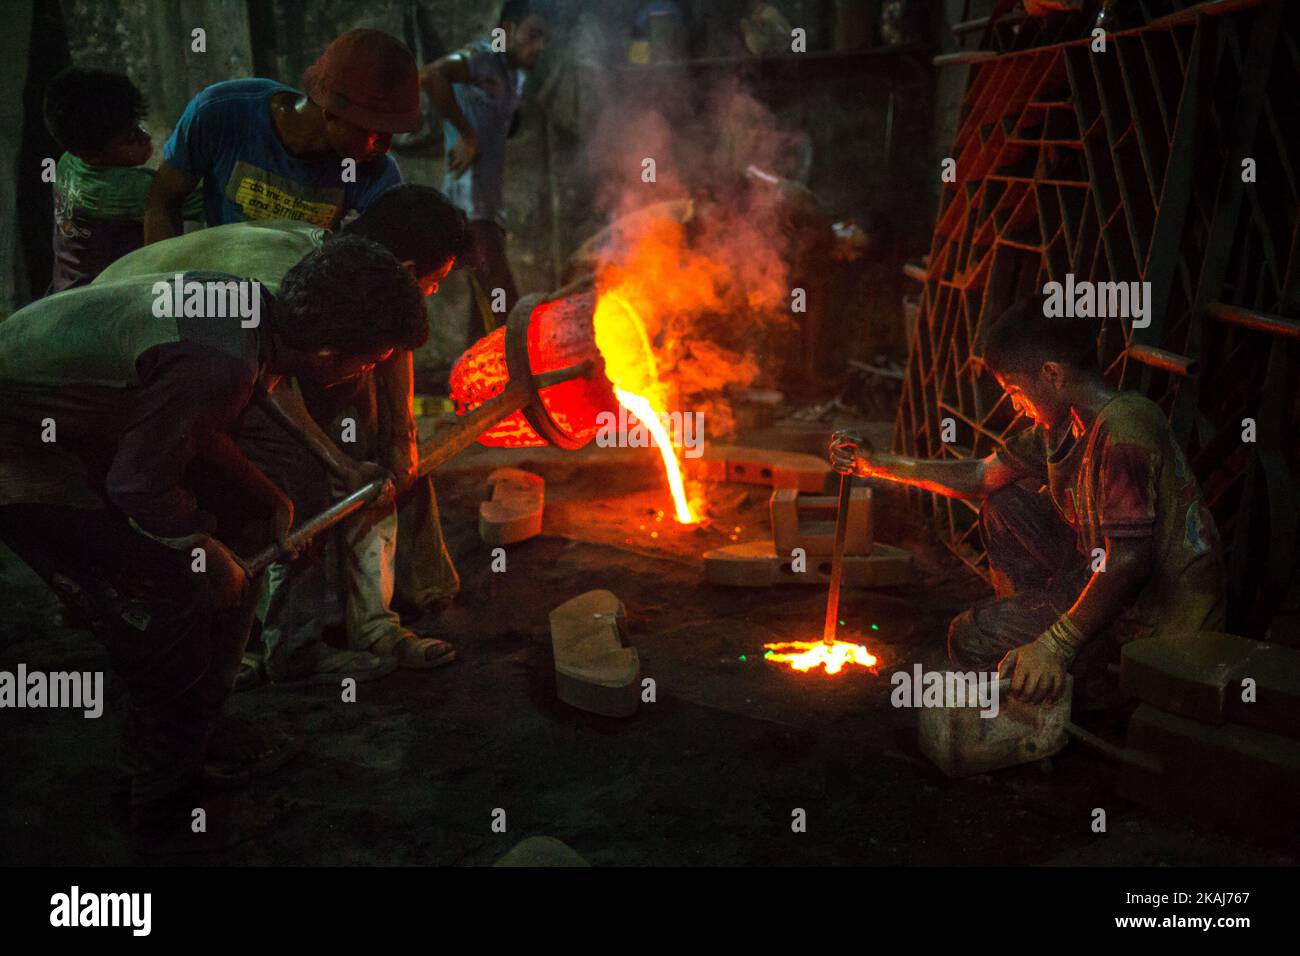 A boy is working in an extreme hot environment which is also dangerous. Ship building industry in Bangladesh spreading rapidly where workers from all ages work together, in Dhaka, Bangladesh, on April 28, 2016. The working condition here is serious and not suitable for any children. Conditions are hot and often dangerous. Even workers do not use minimum safety guard. Therefore accidents happen very frequently. Children who work here are growing up without education which has been leading them towards uncertain future. The reason of child labor in such dangerous working condition is cheap labor Stock Photo